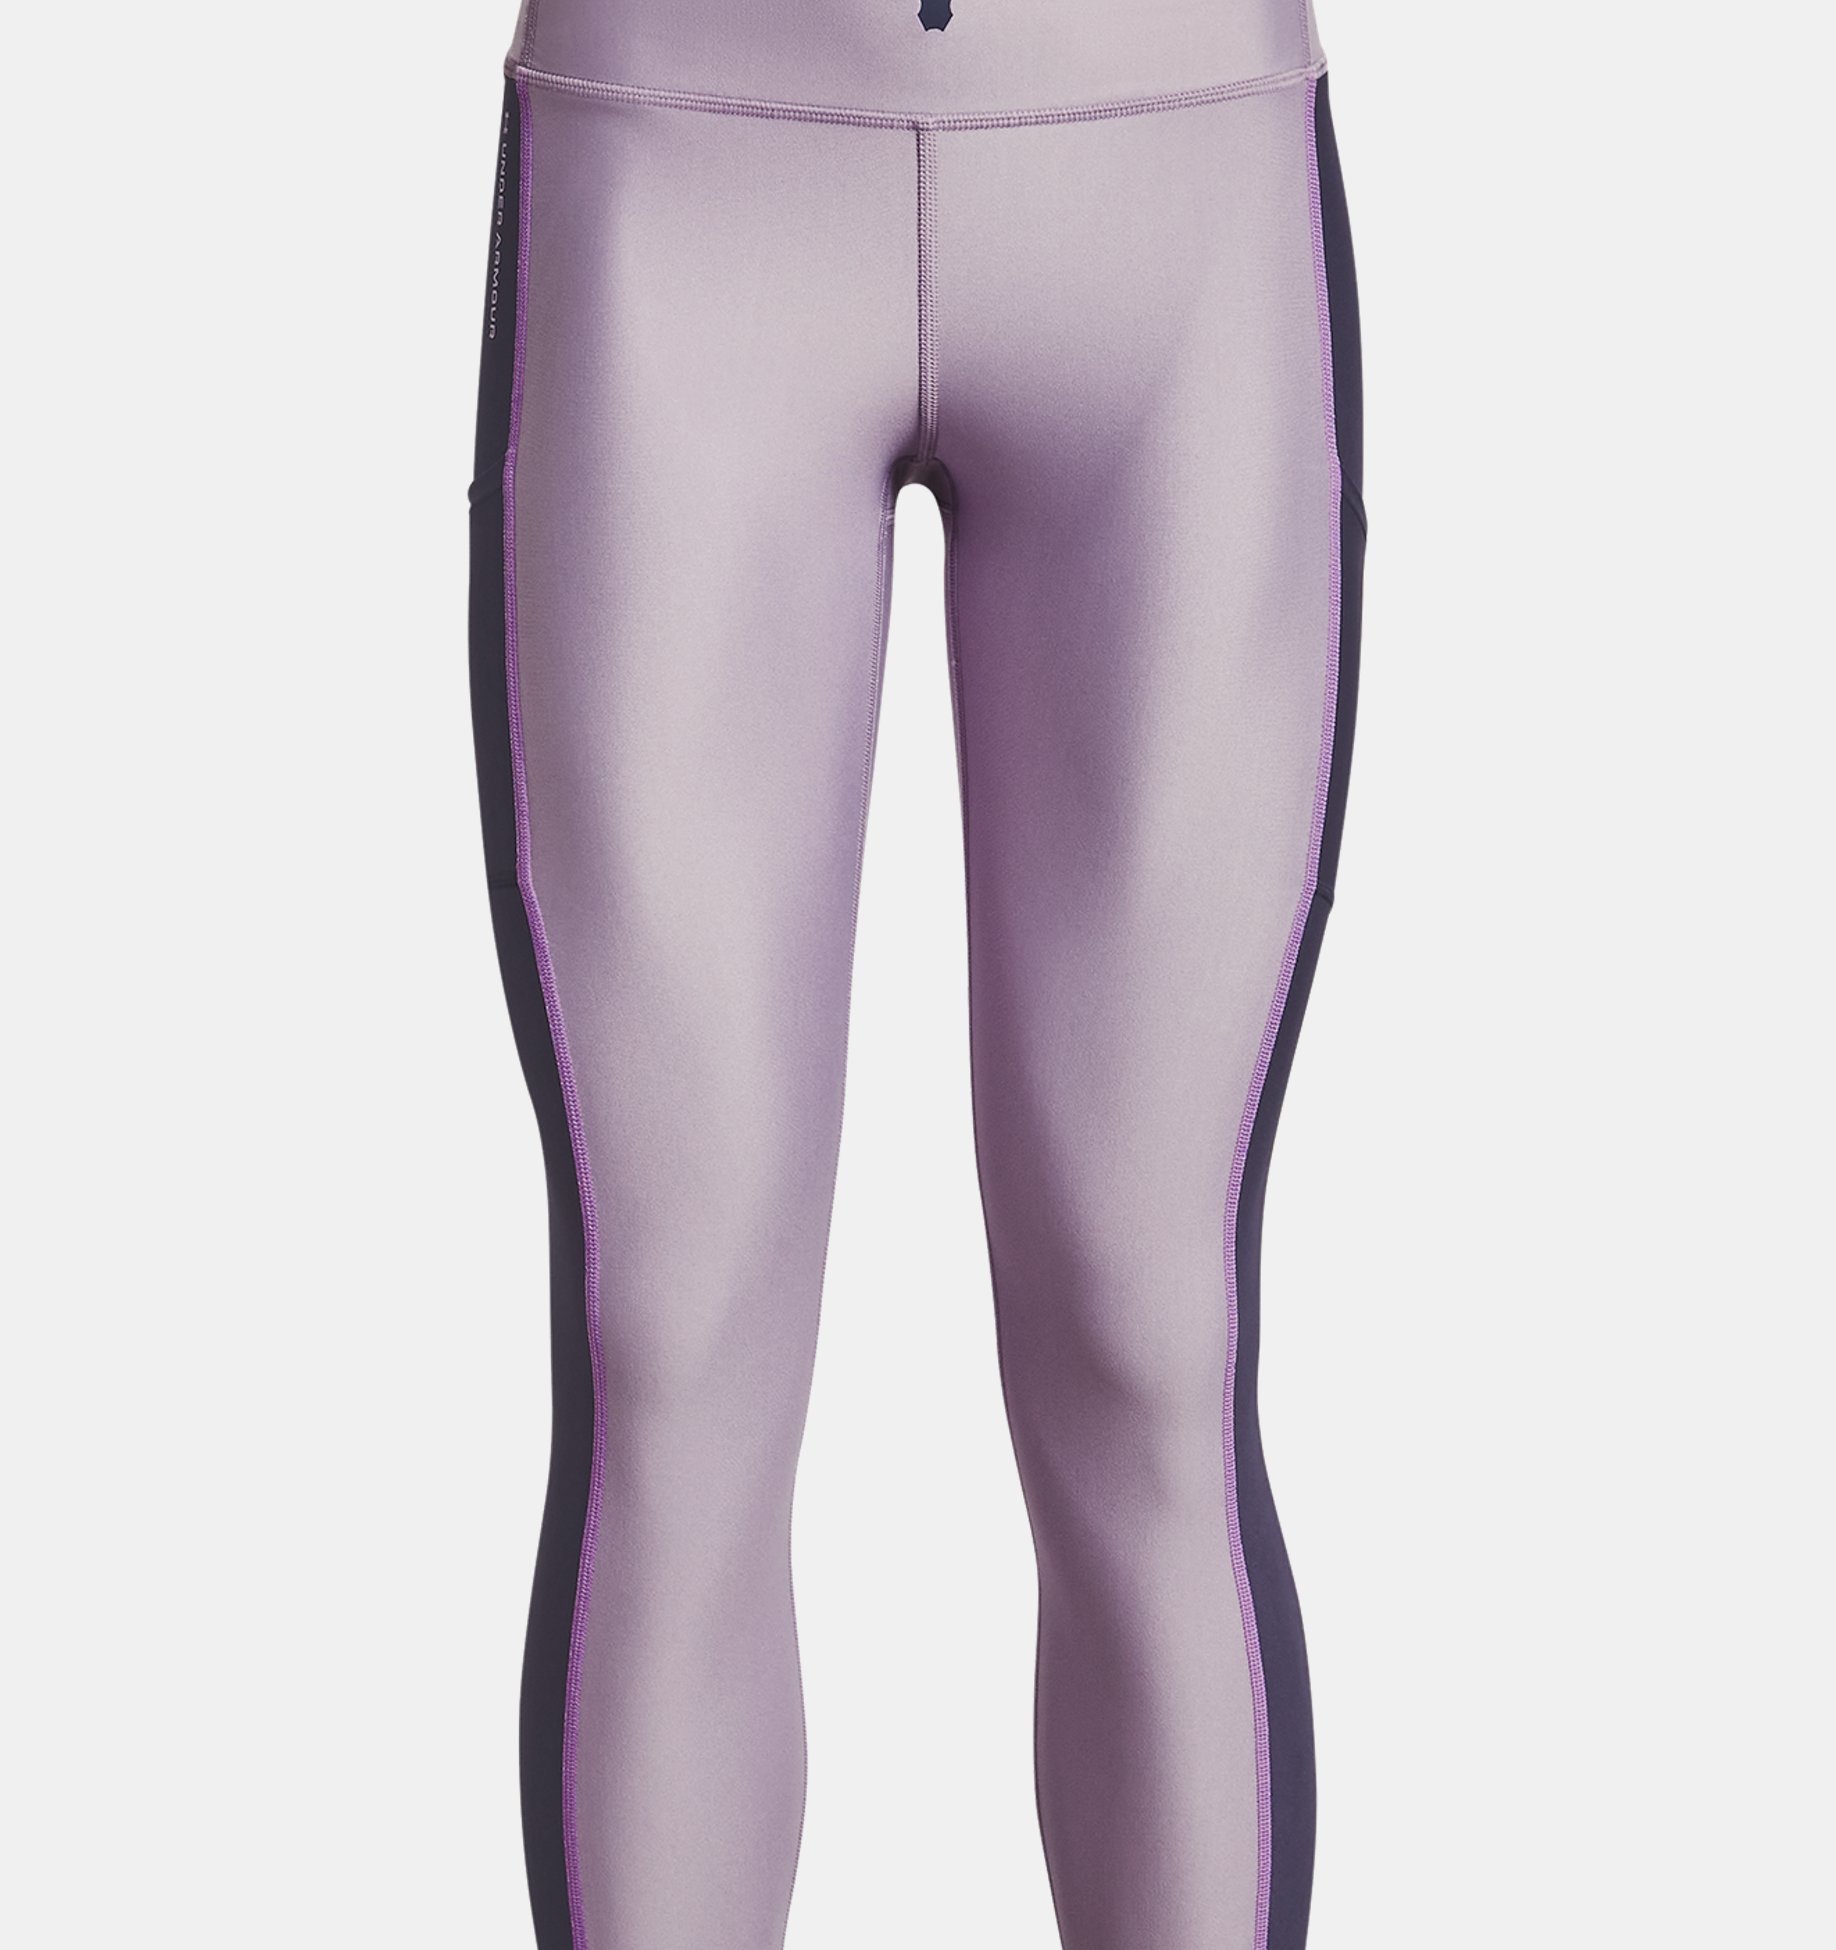 UNDER ARMOUR WOMEN'S COMPRESSION HIGH-RISE ANKLE LEGGINGS PURPLE#1374133-NWT